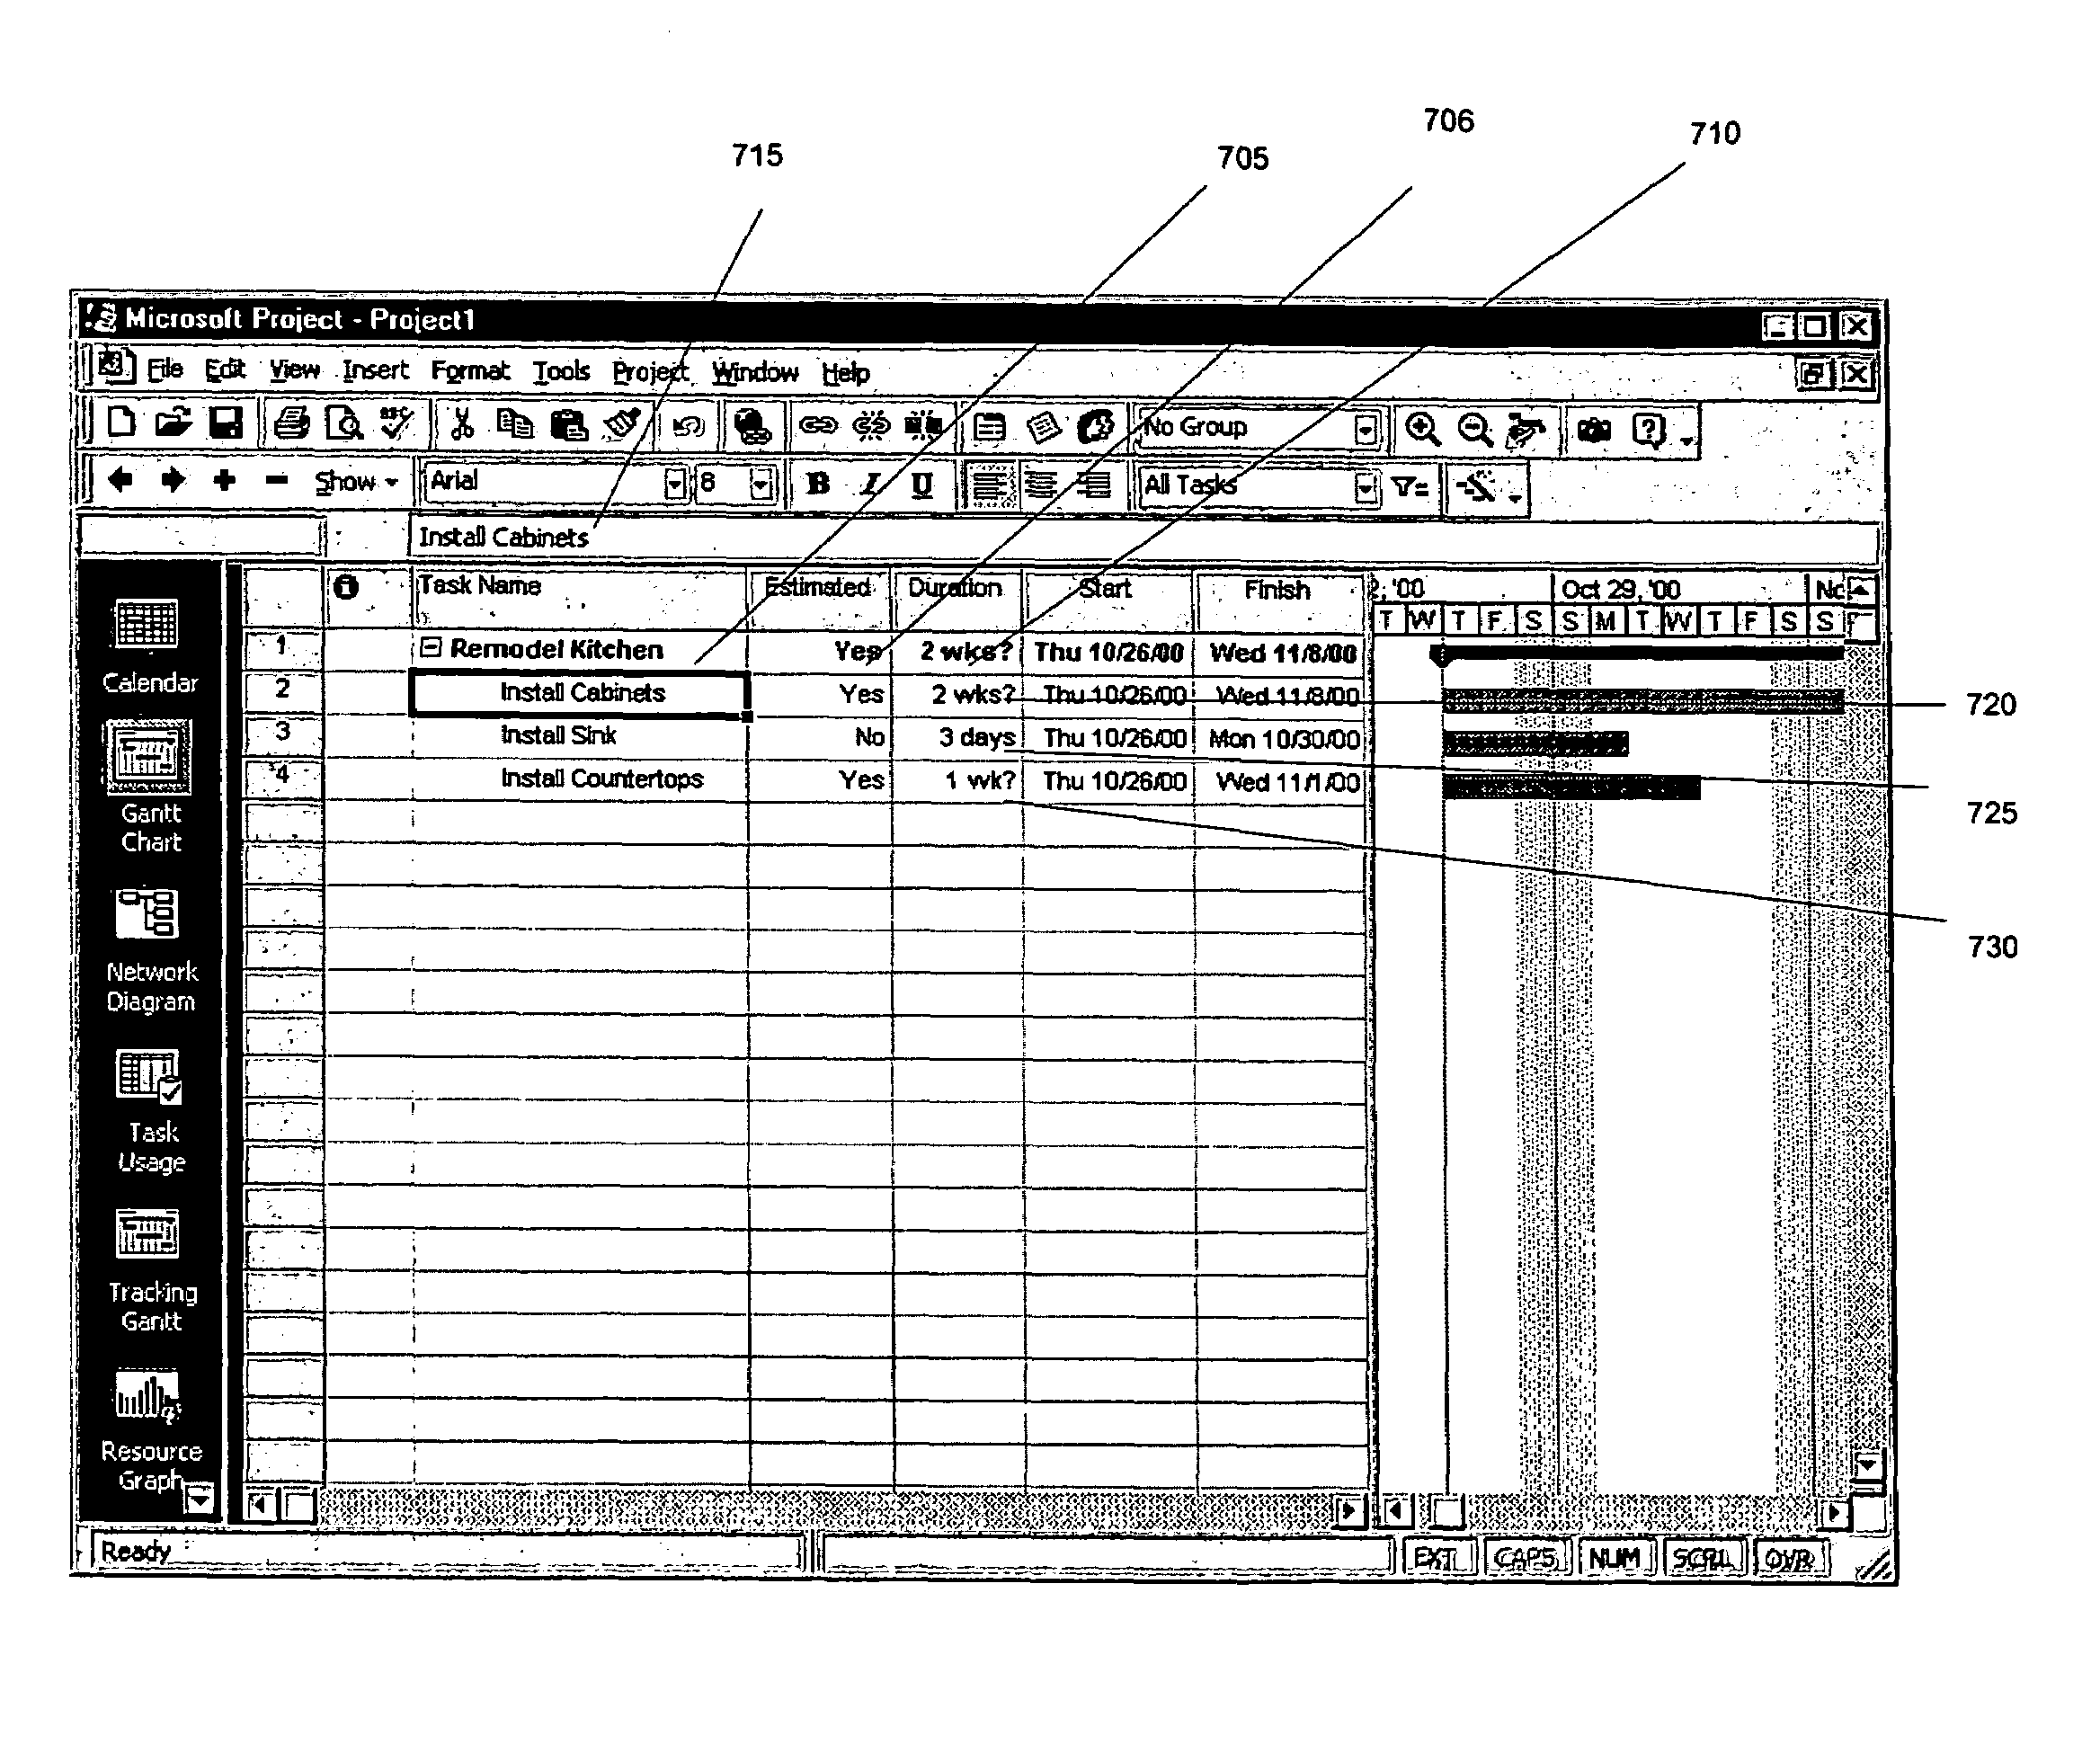 Method and system for visually indicating project task durations are estimated using a character